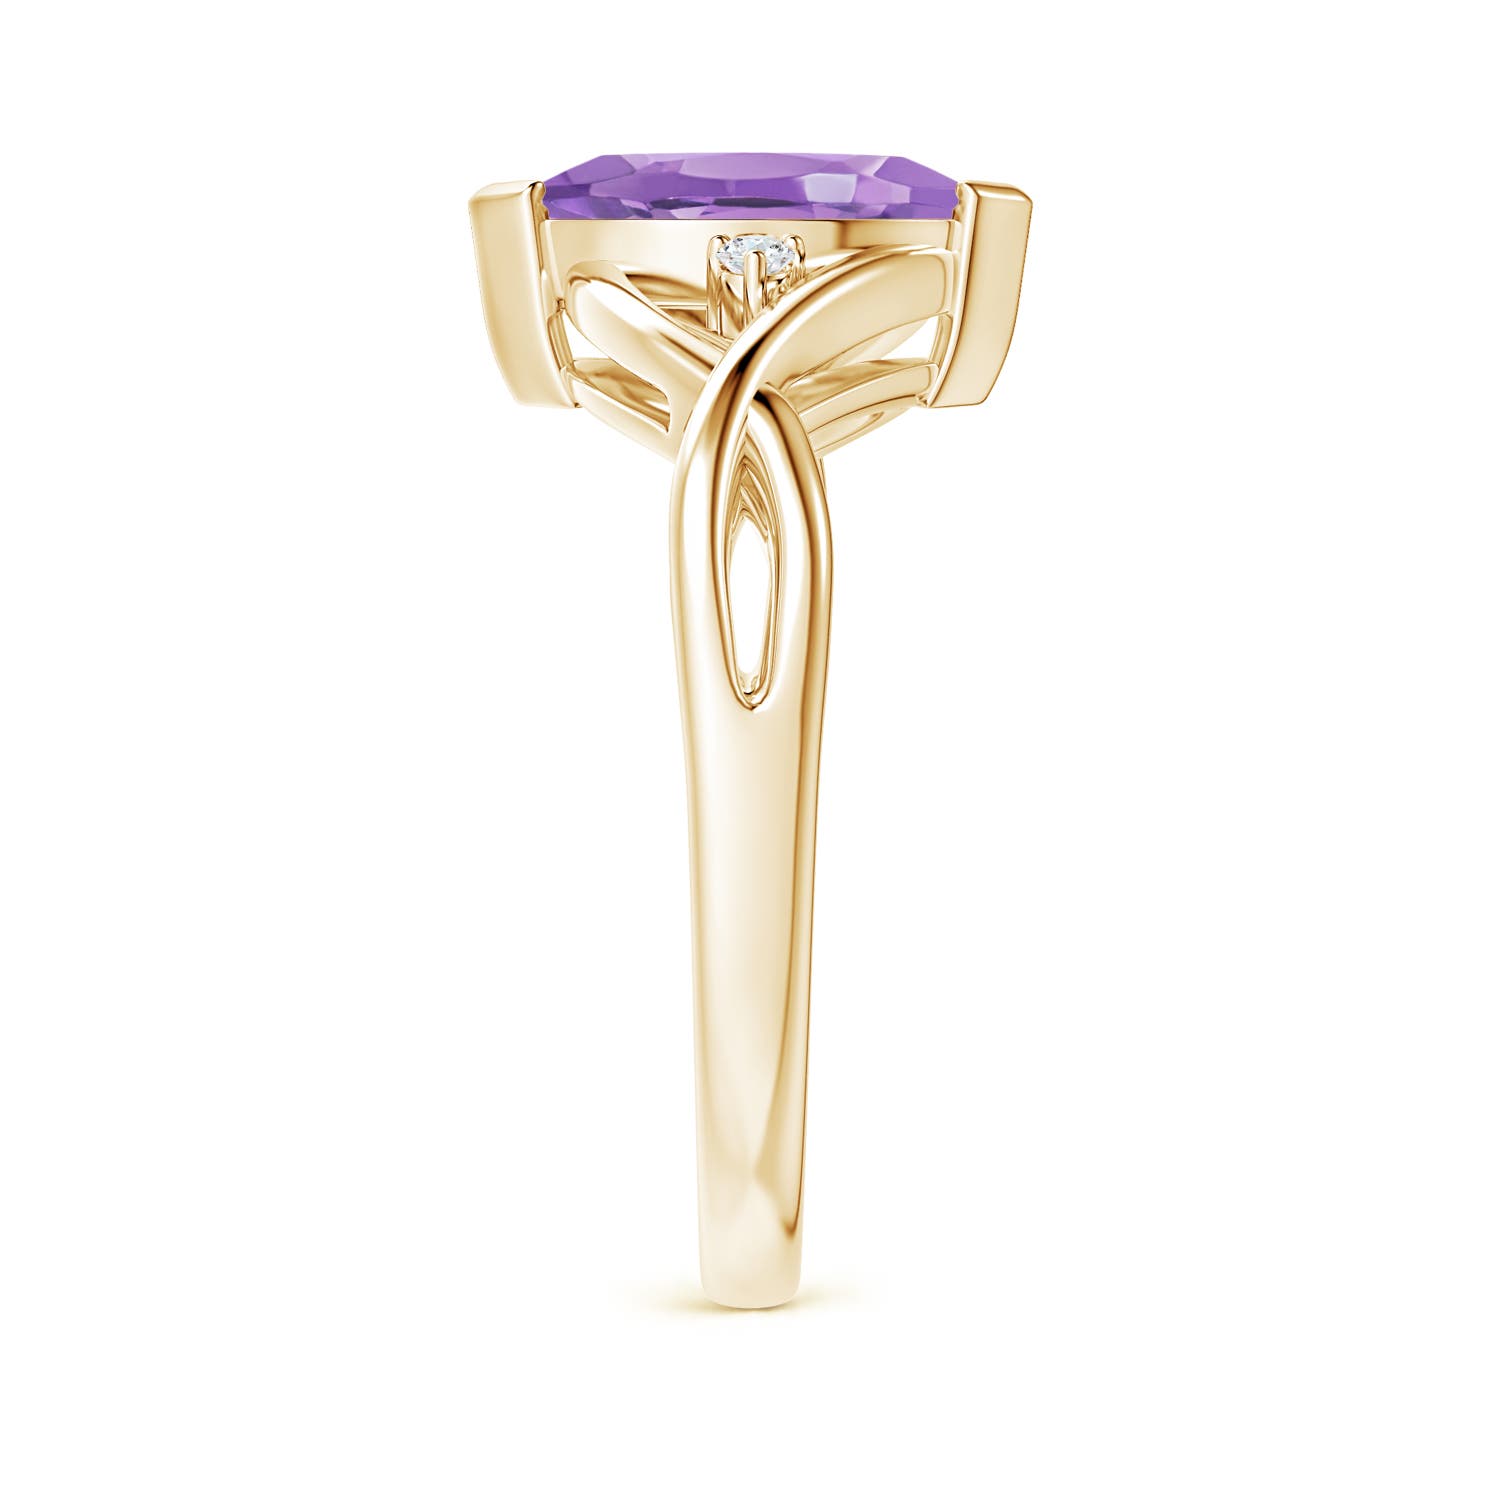 A - Amethyst / 0.98 CT / 14 KT Yellow Gold